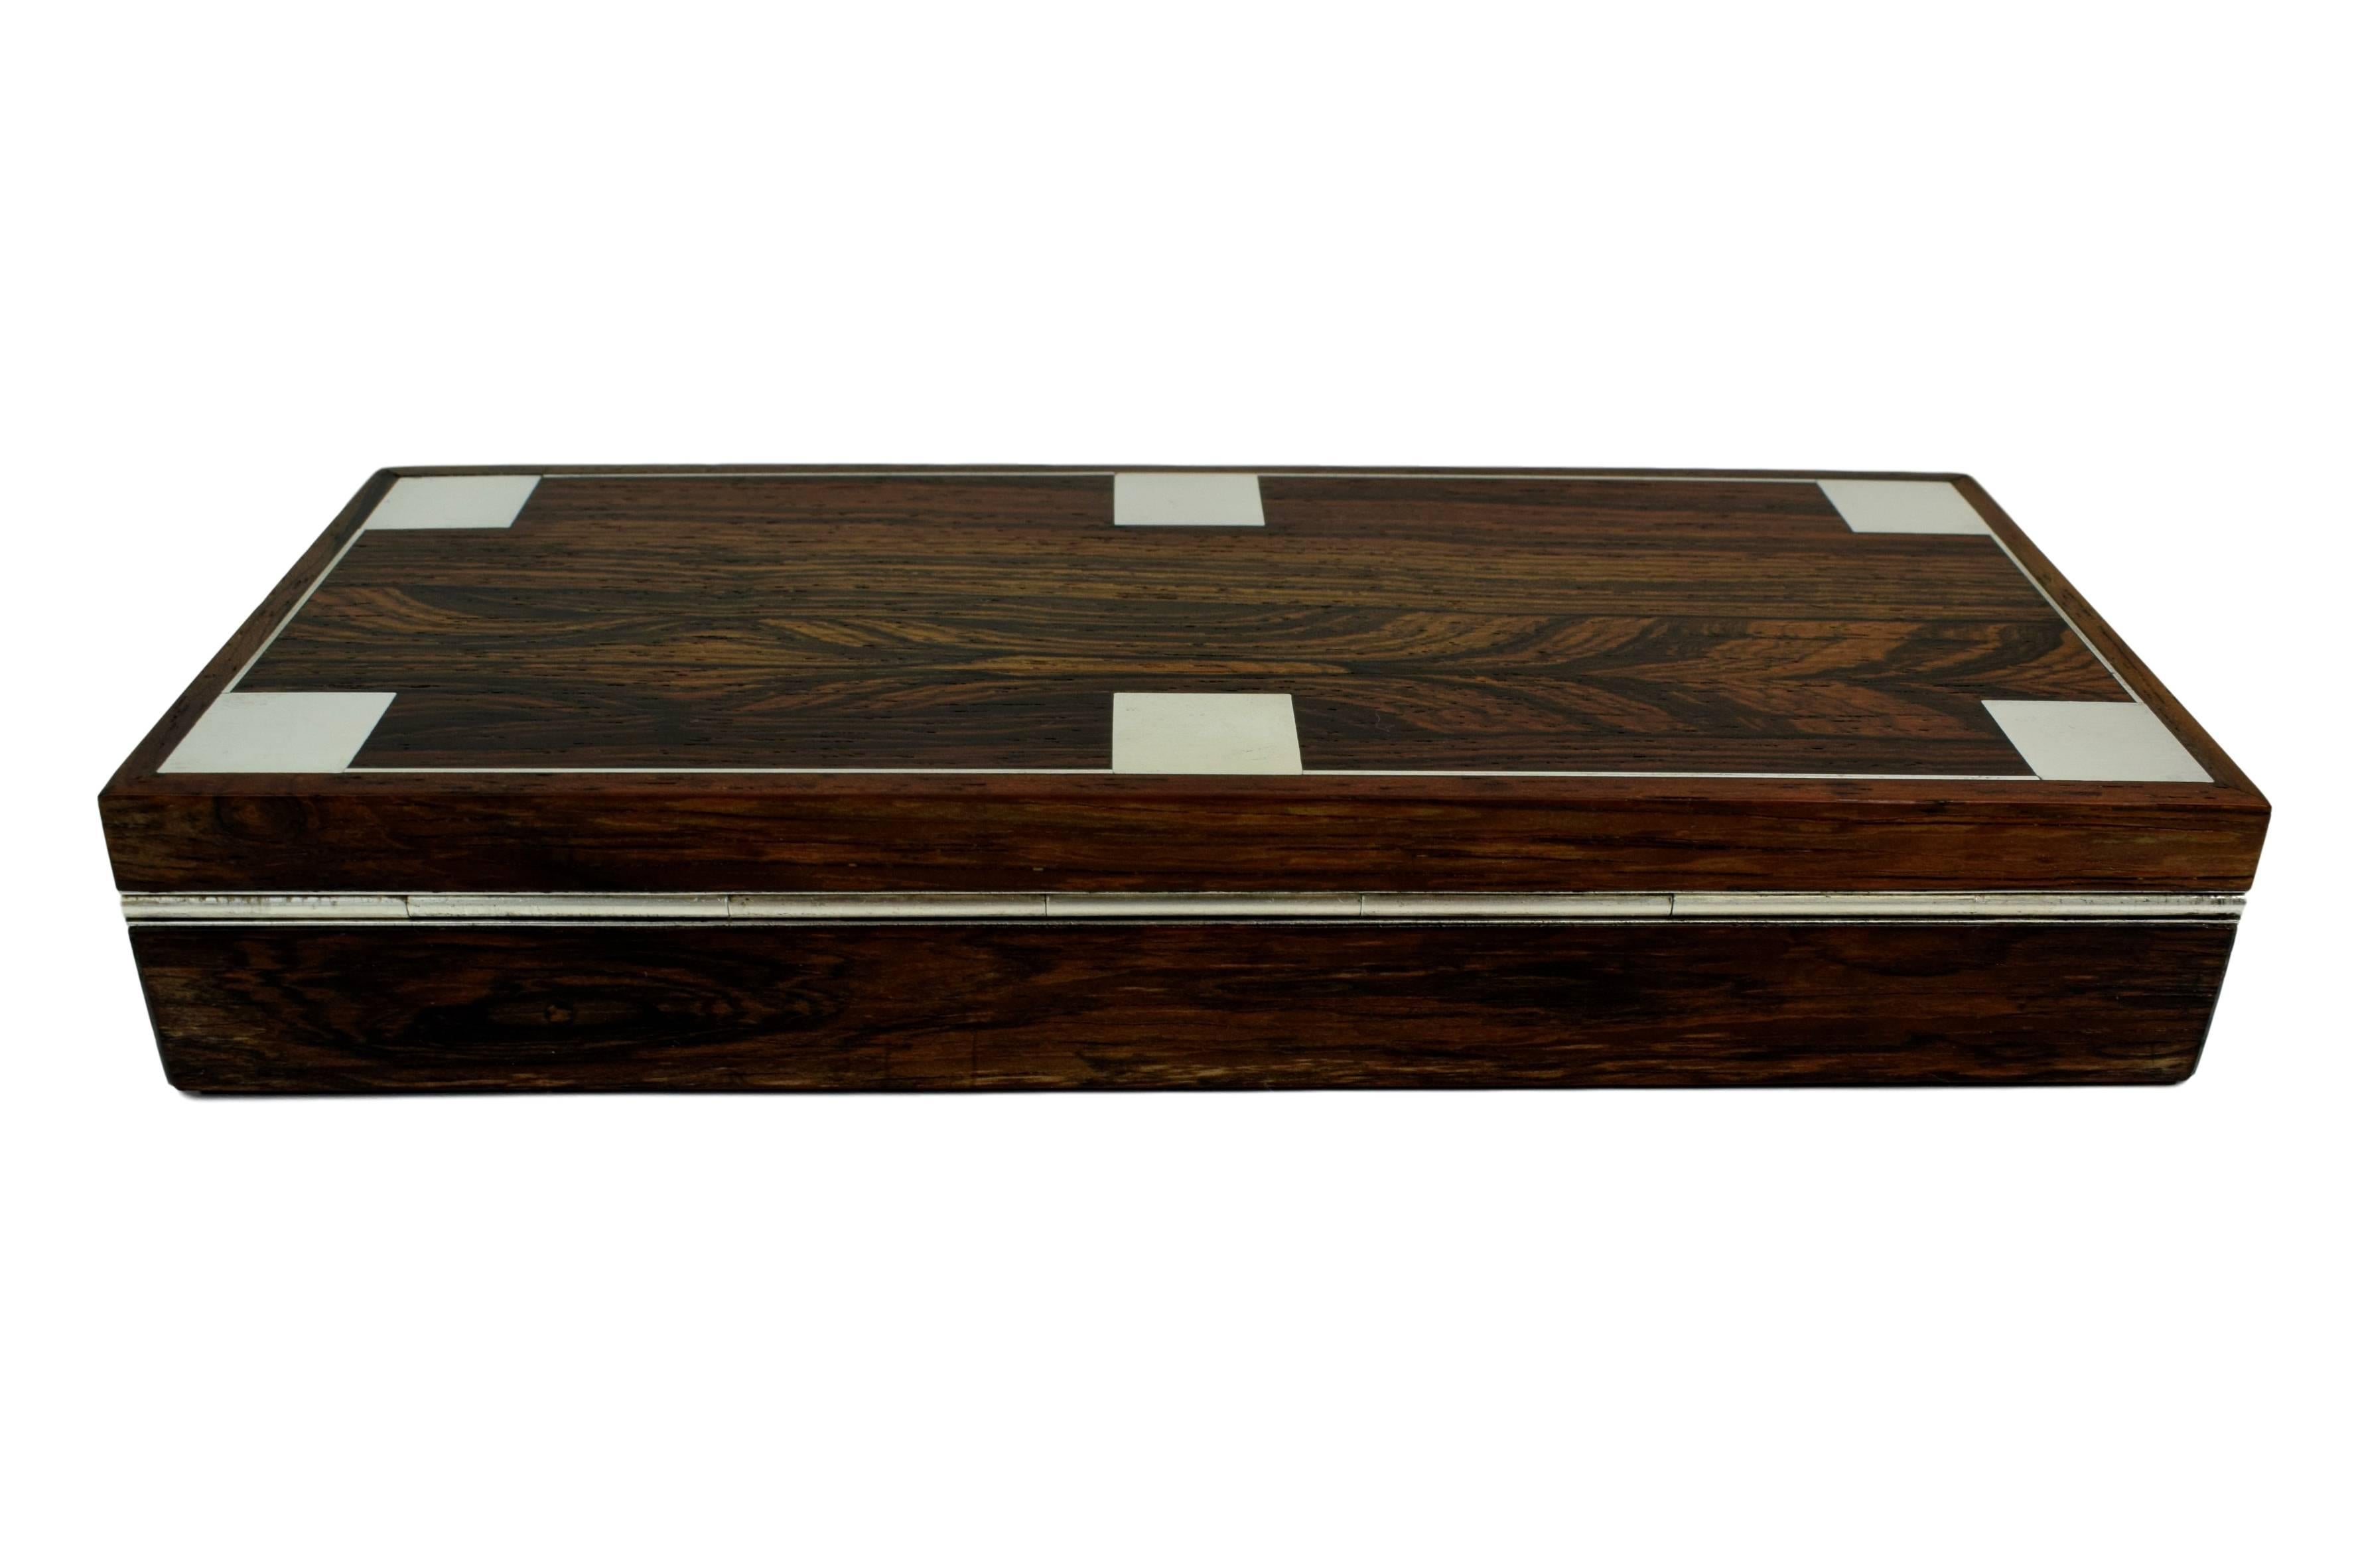 Mid-20th Century Danish Midcentury Rosewood Box with Sterling 925 Silver Inlays by Hans Hansen For Sale